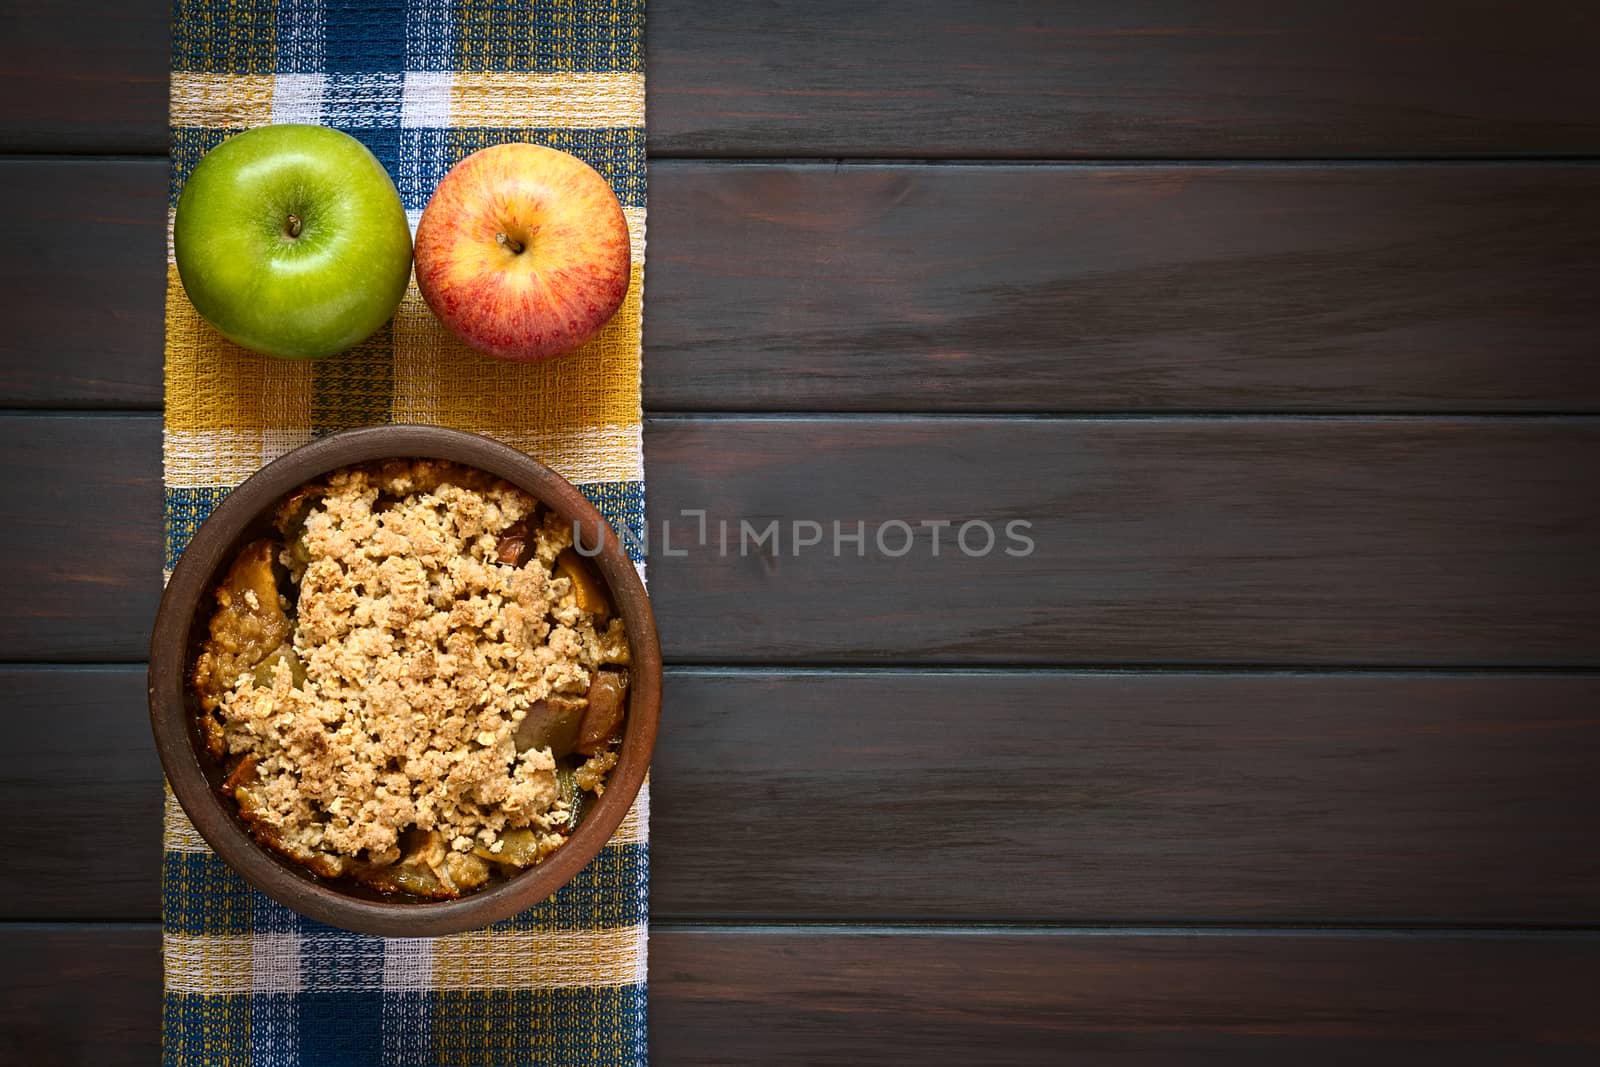 Overhead shot of a rustic bowl of baked apple crumble or crisp with fresh apples on a kitchen towel, photographed on dark wood with natural light